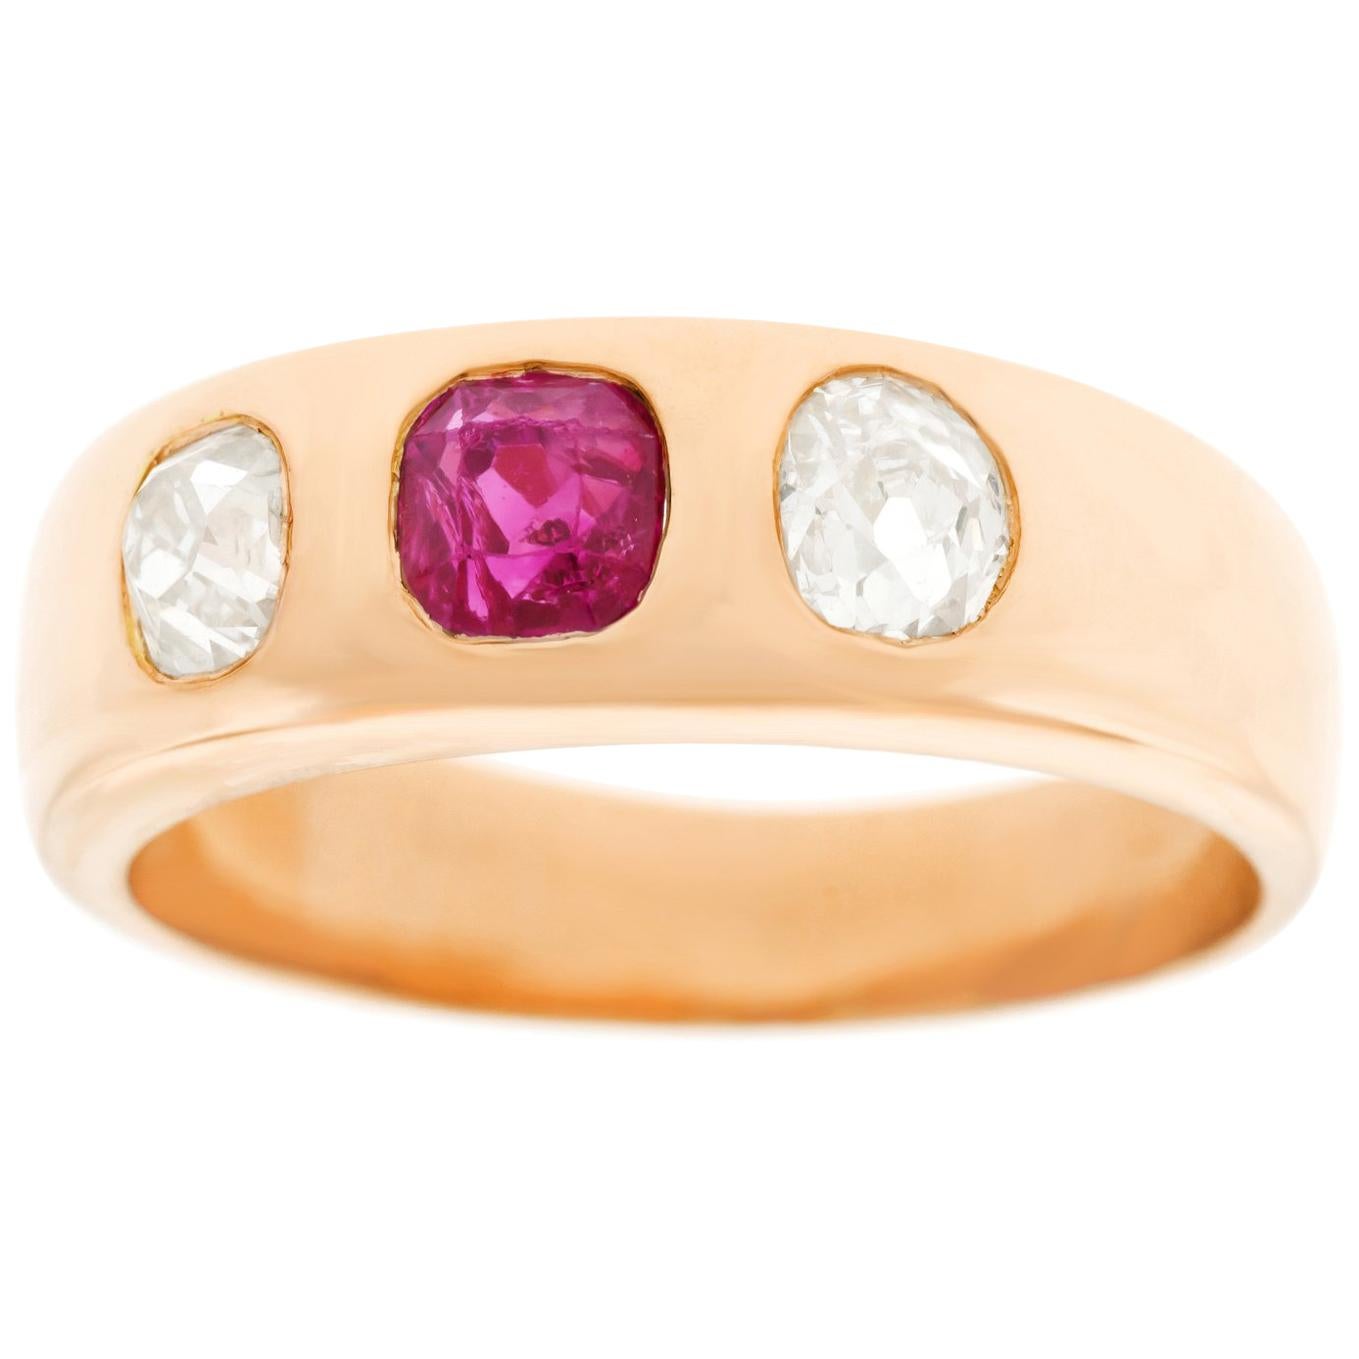 Diamond and Ruby Gypsy Set Art Deco Gold Ring